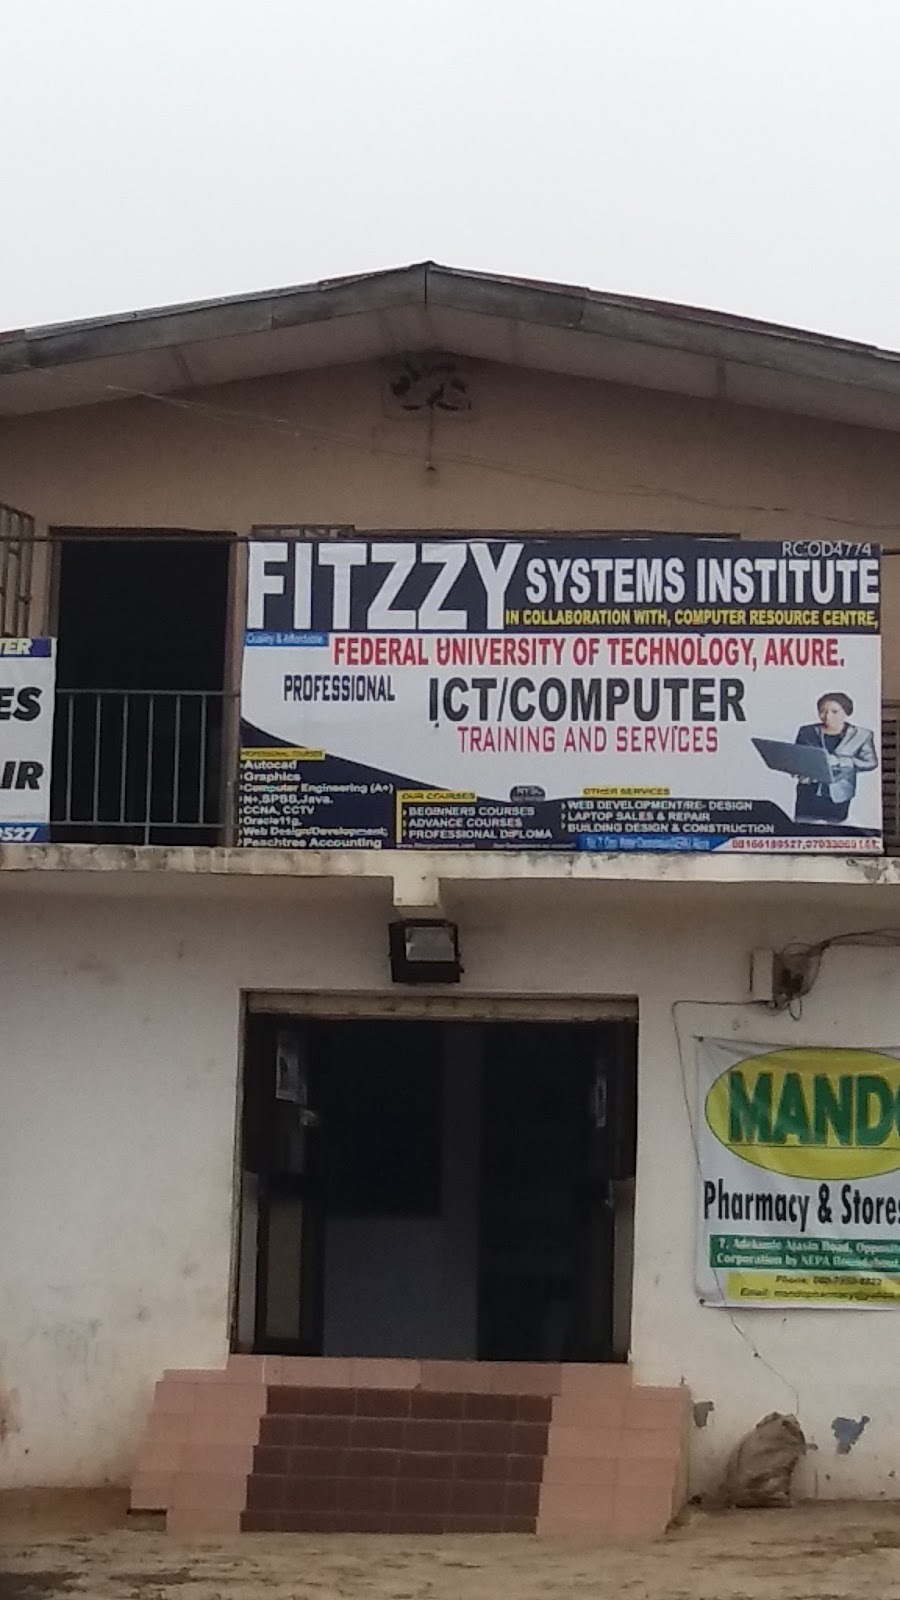 Fitzzy Systems Institute